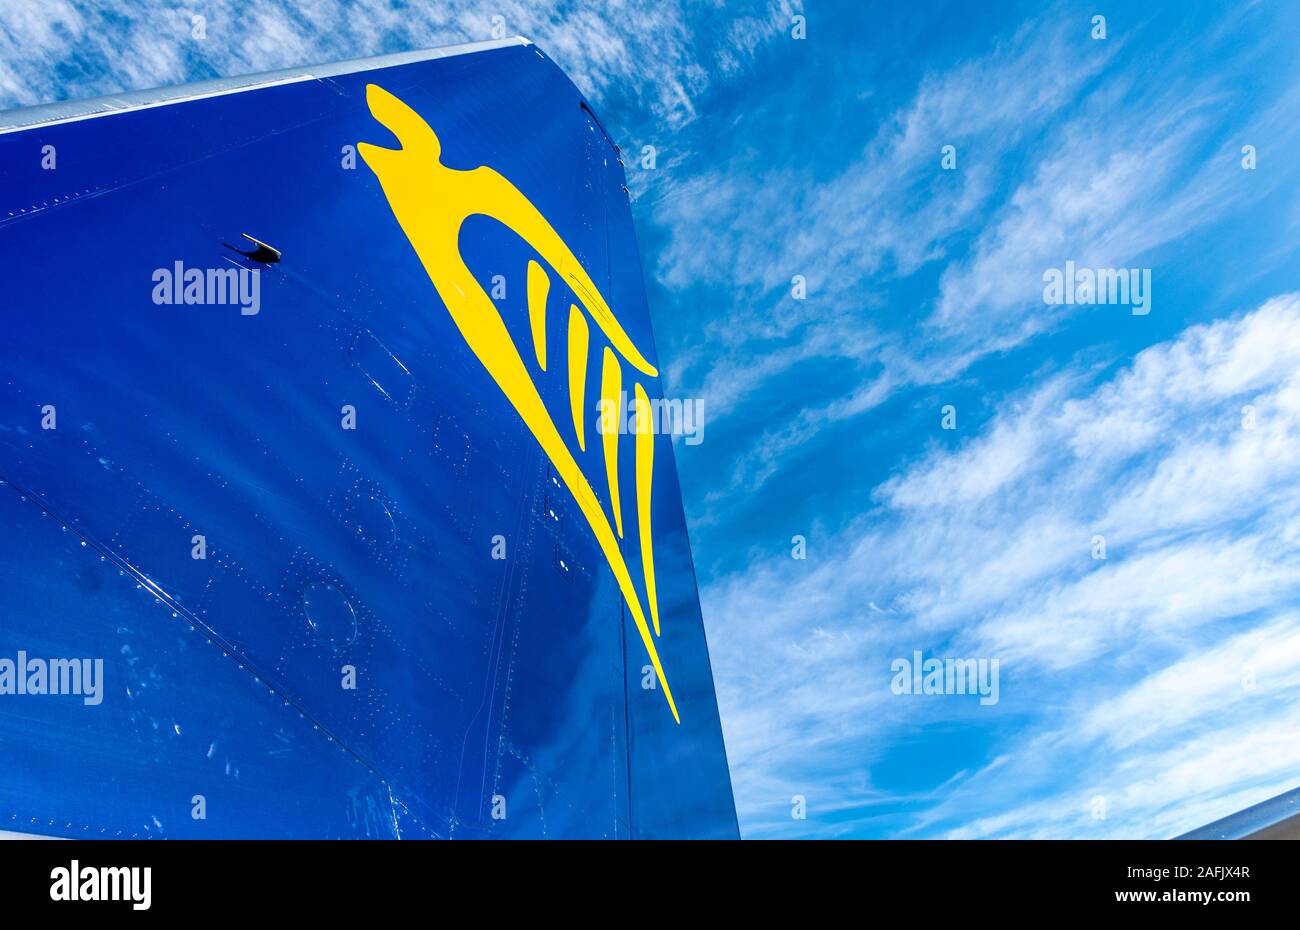 Tailfin or sail of a Ryanair Boeing 737-800 series aircraft showing company logo harp design. Stock Photo